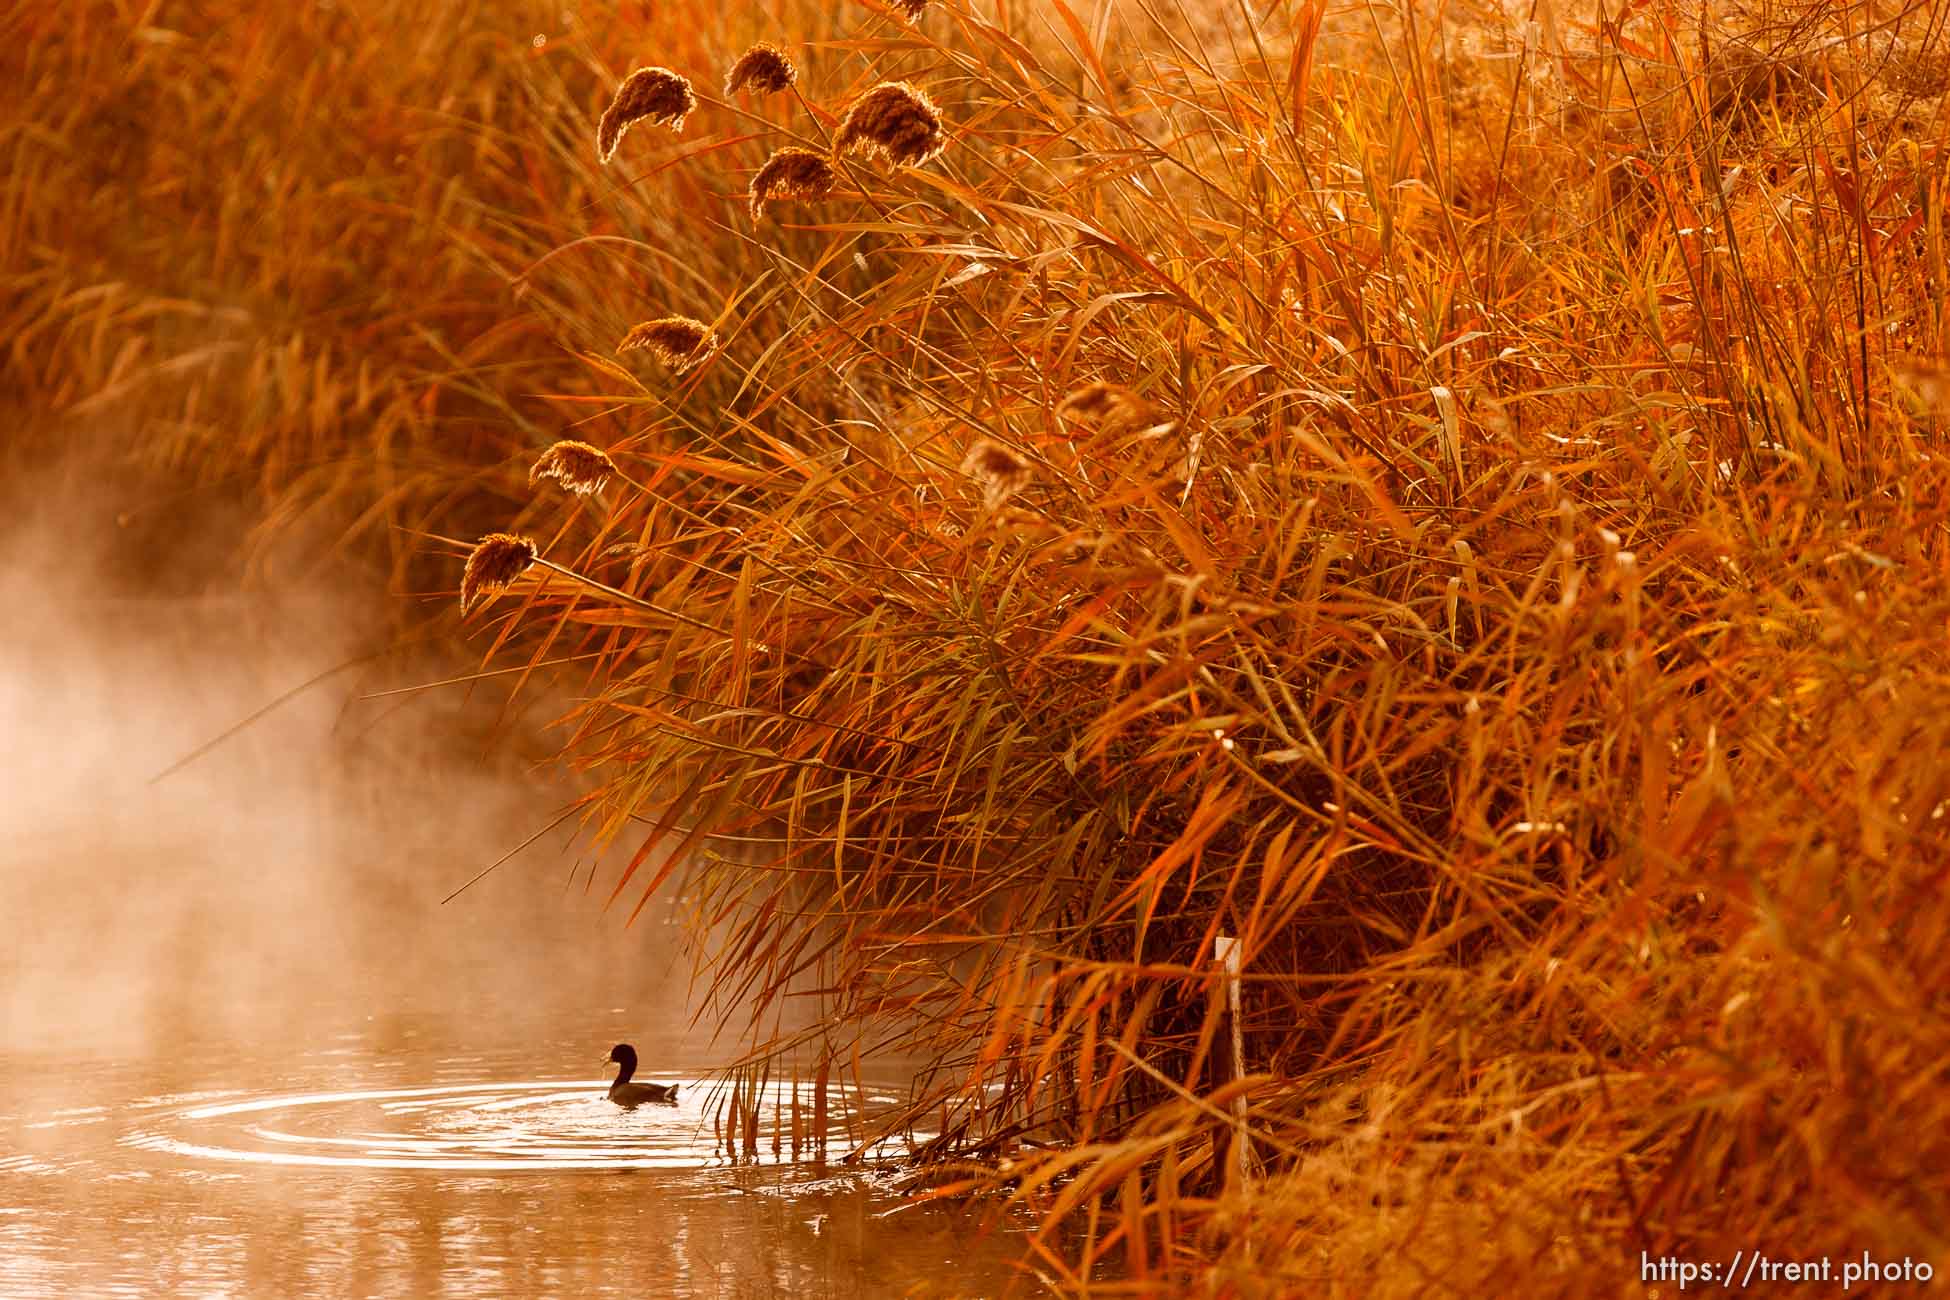 Trent Nelson  |  The Salt Lake Tribune
Ducks in the mist at the Water Reclamation Plant Wetlands along 2300 North in Salt Lake City, Utah, Wednesday, December 14, 2011.